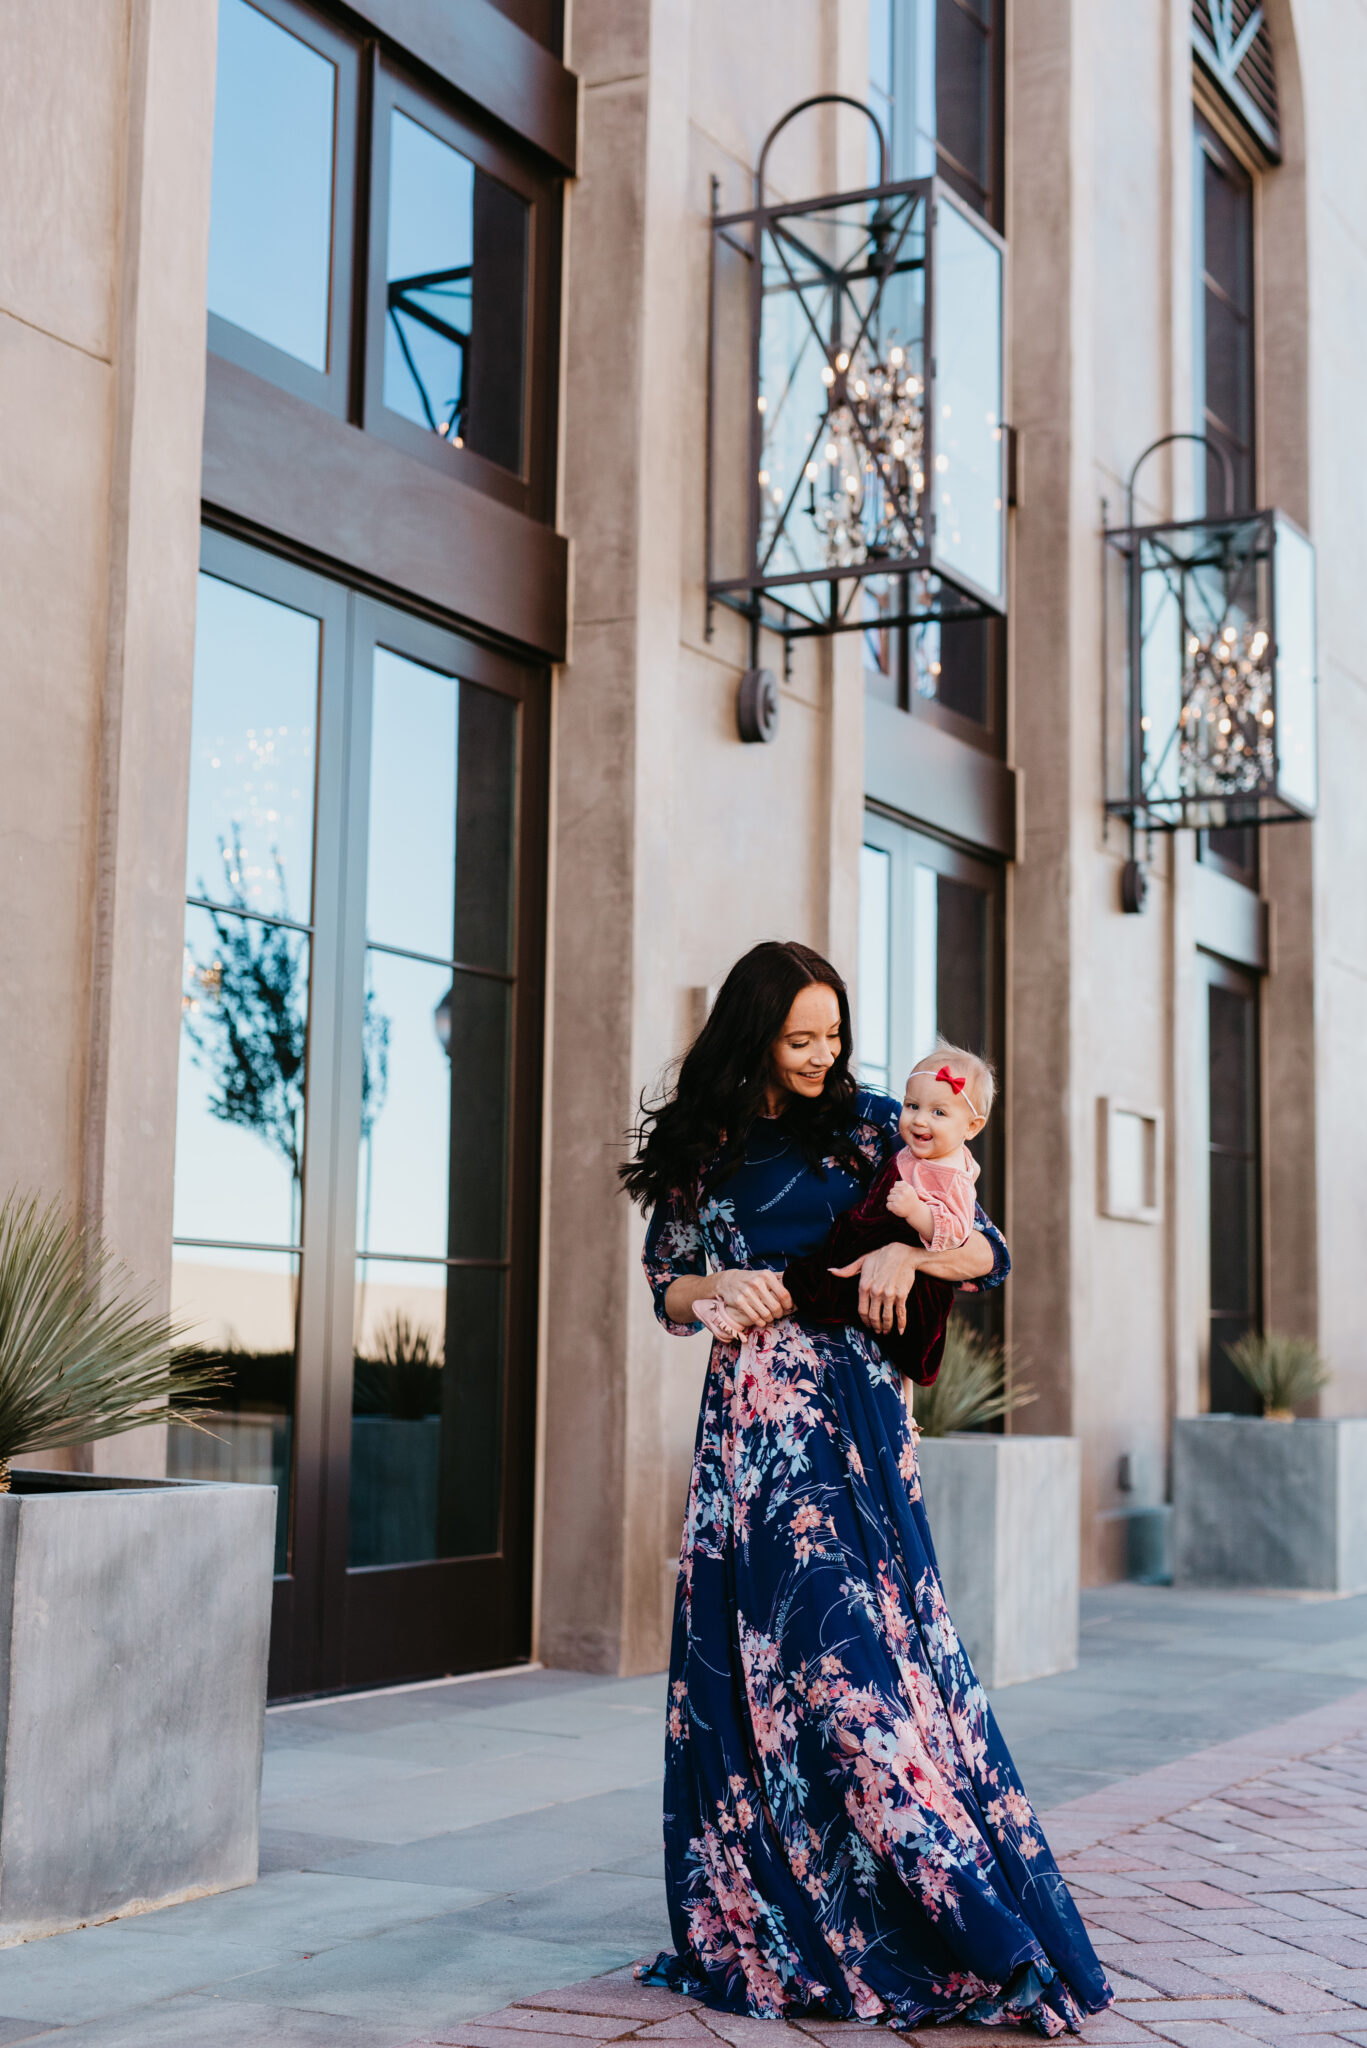 Cute Easter Dresses for Spring featured by top US fashion blog, Outfits & Outings: image of a woman wearing a maxi floral dress with her baby wearing a pink color block dress